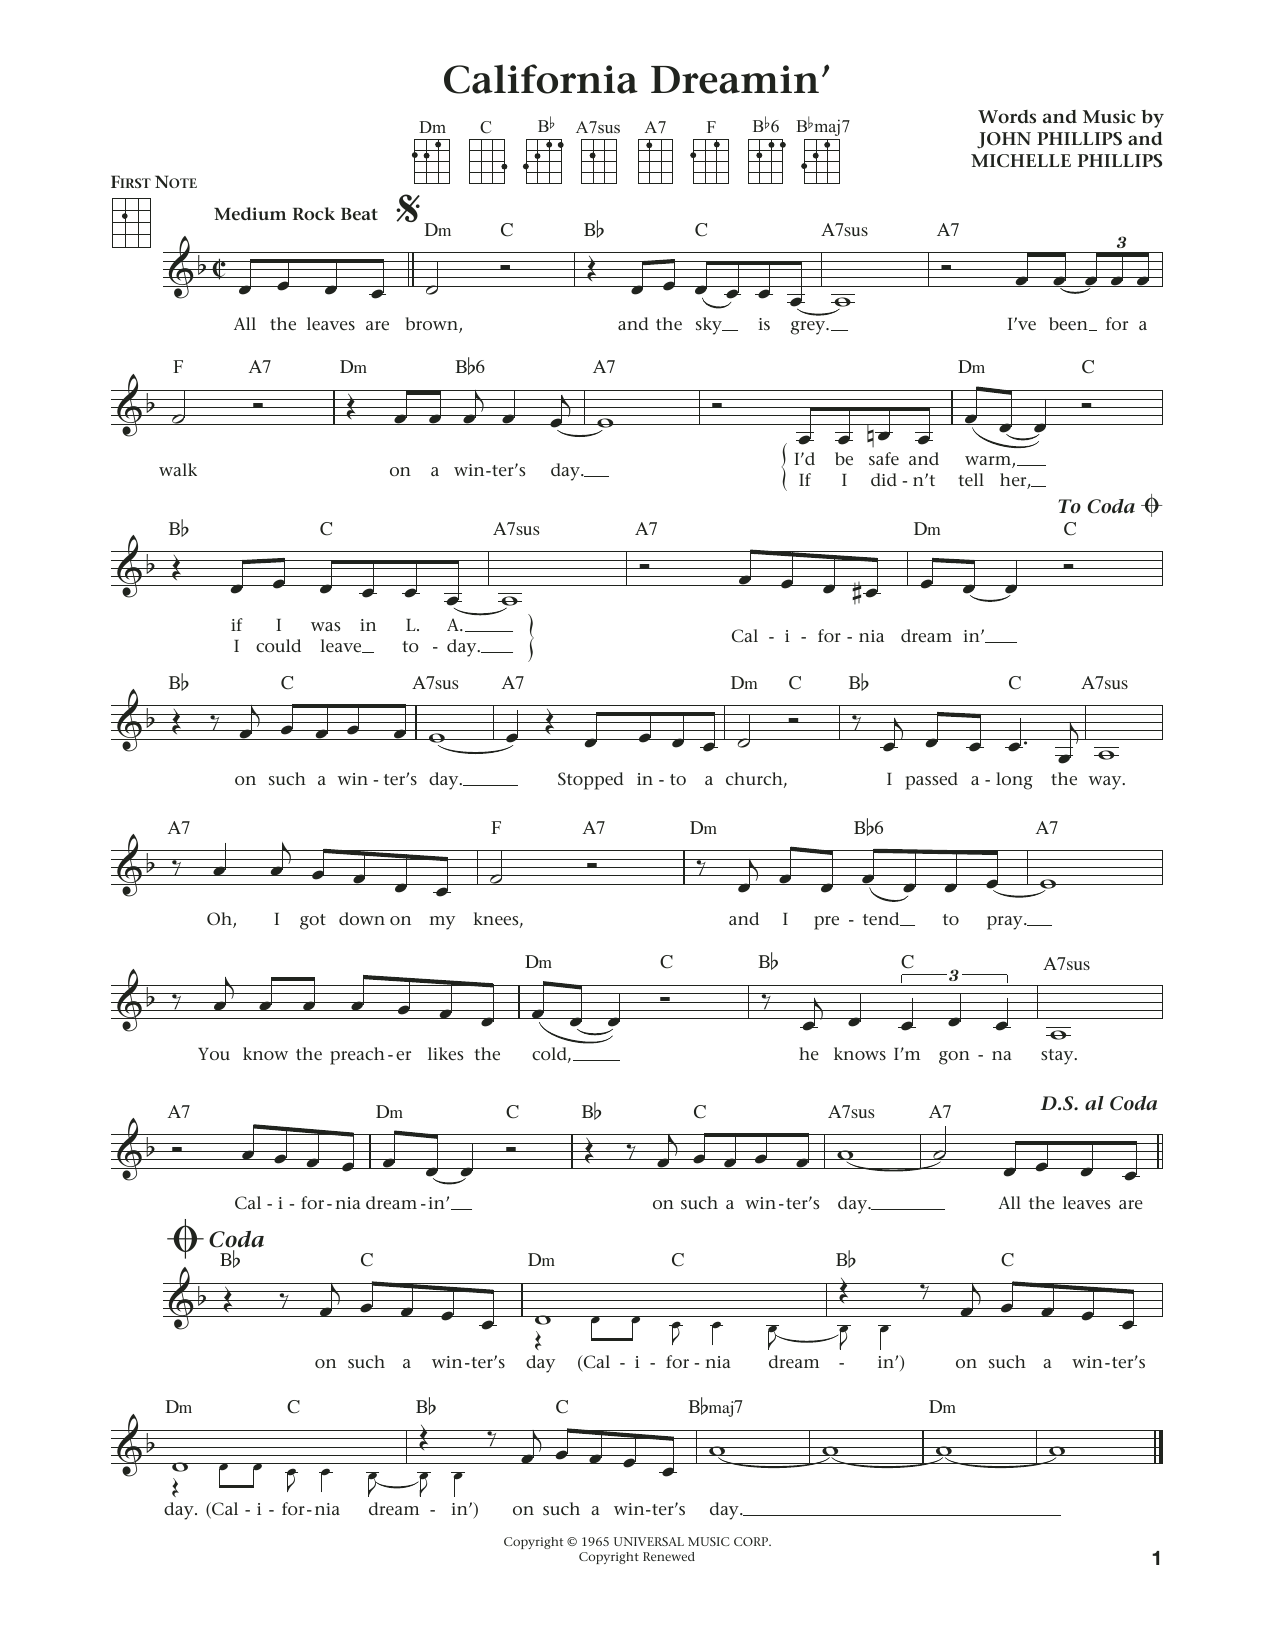 Download The Mamas & The Papas California Dreamin' (from The Daily Uku Sheet Music